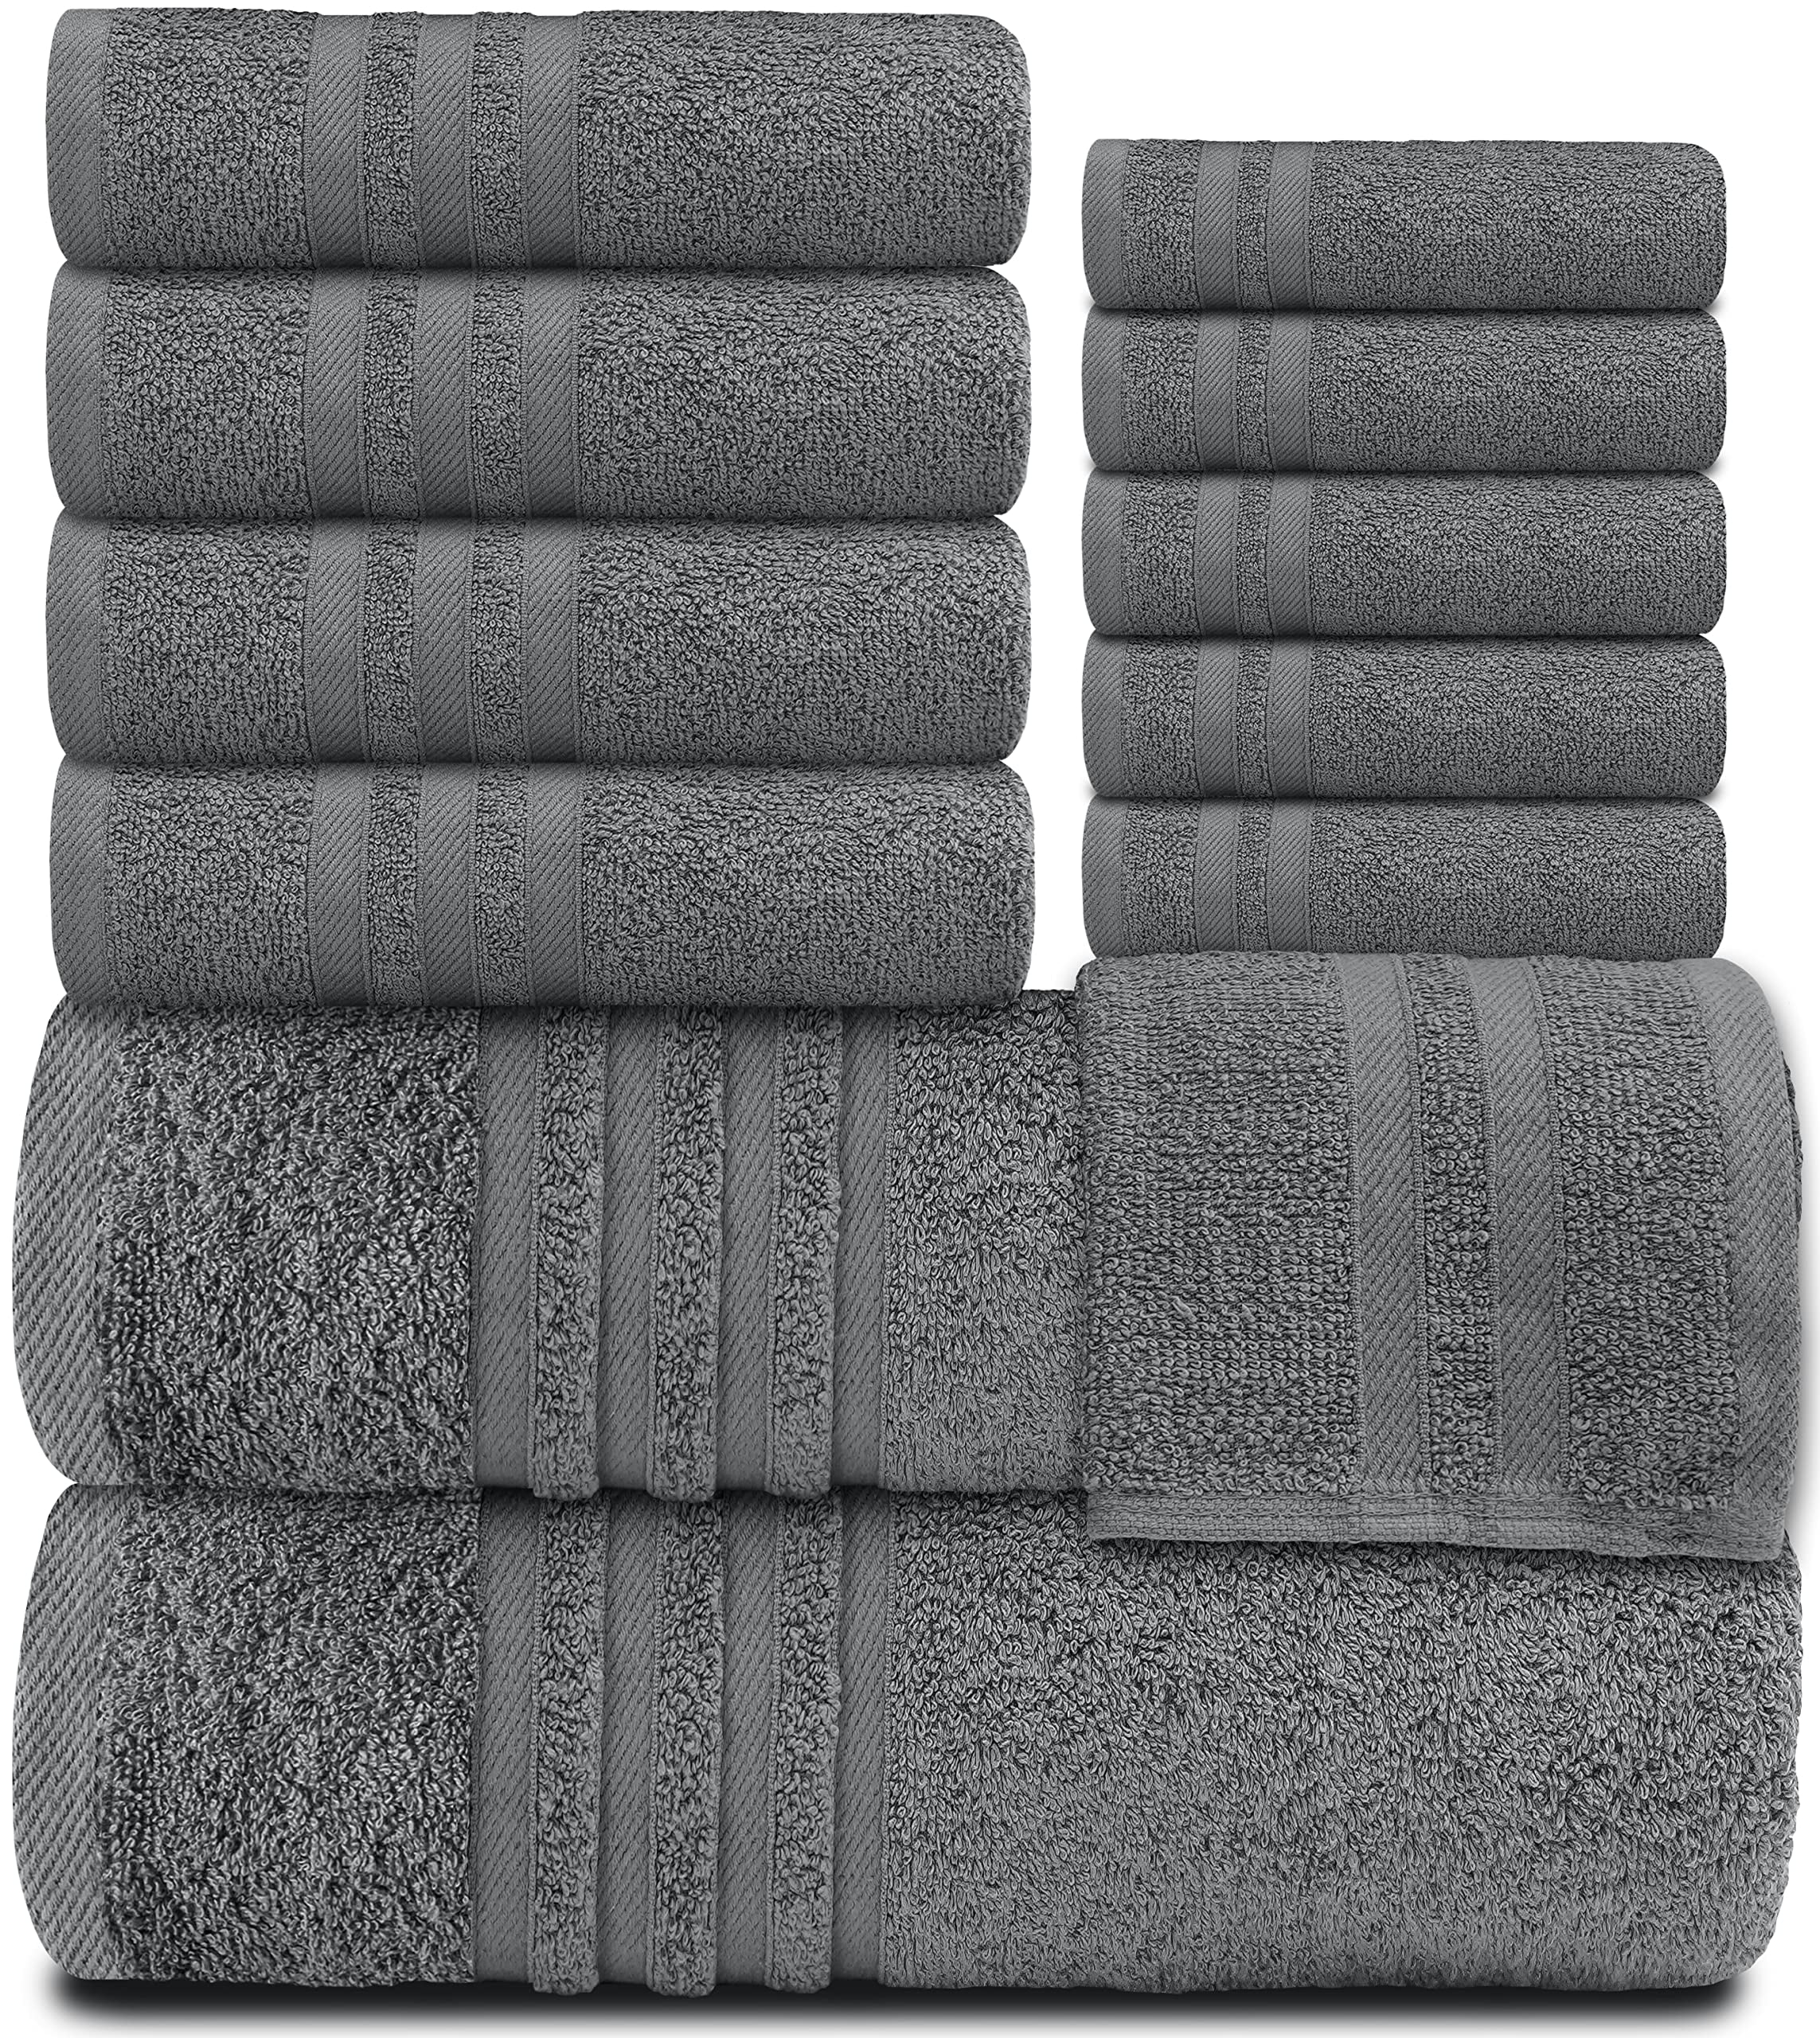 White Classic 12 Piece Bath Towel Set for Bathroom - Wealuxe Collection 2  Bath Towels, 4 Hand Towels, 6 Washcloths 100% Cotton Soft and Plush Highly